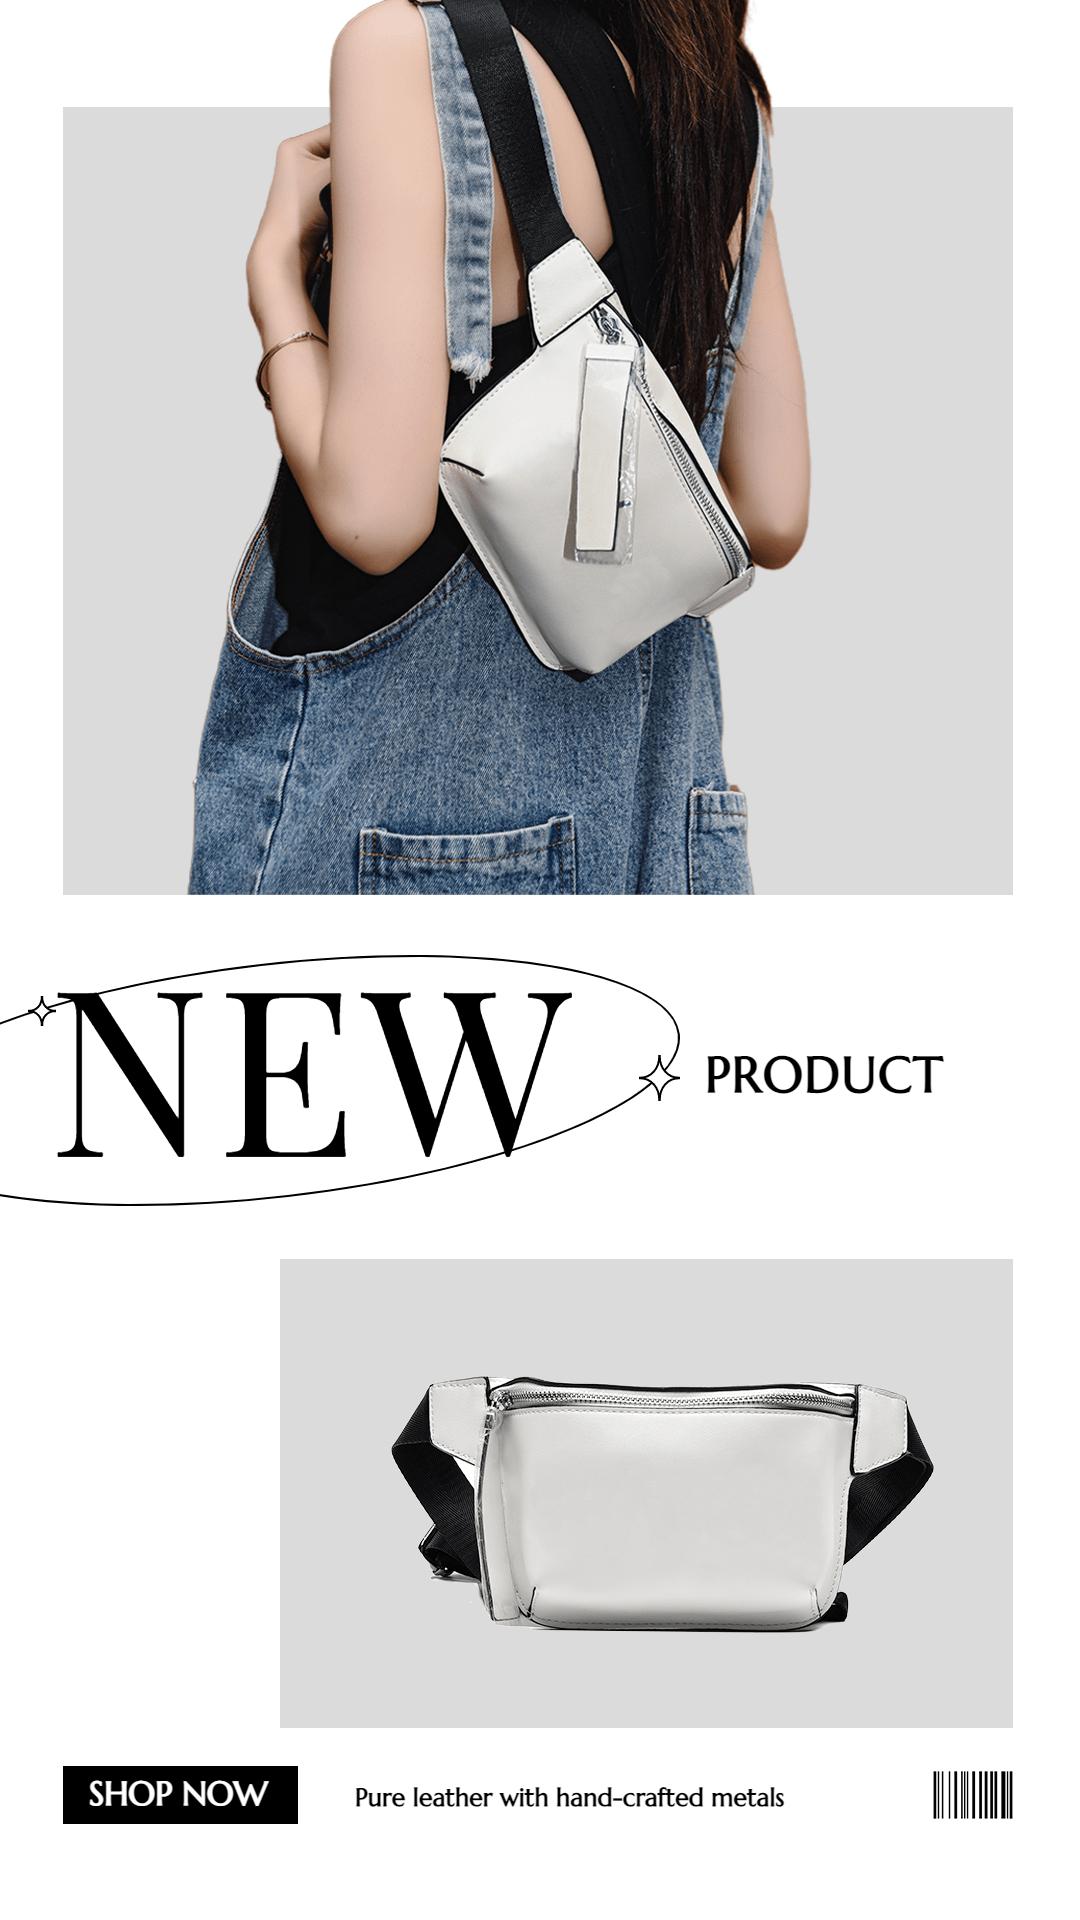 Simple Women's Bags New Arrival Ecommerce Story预览效果